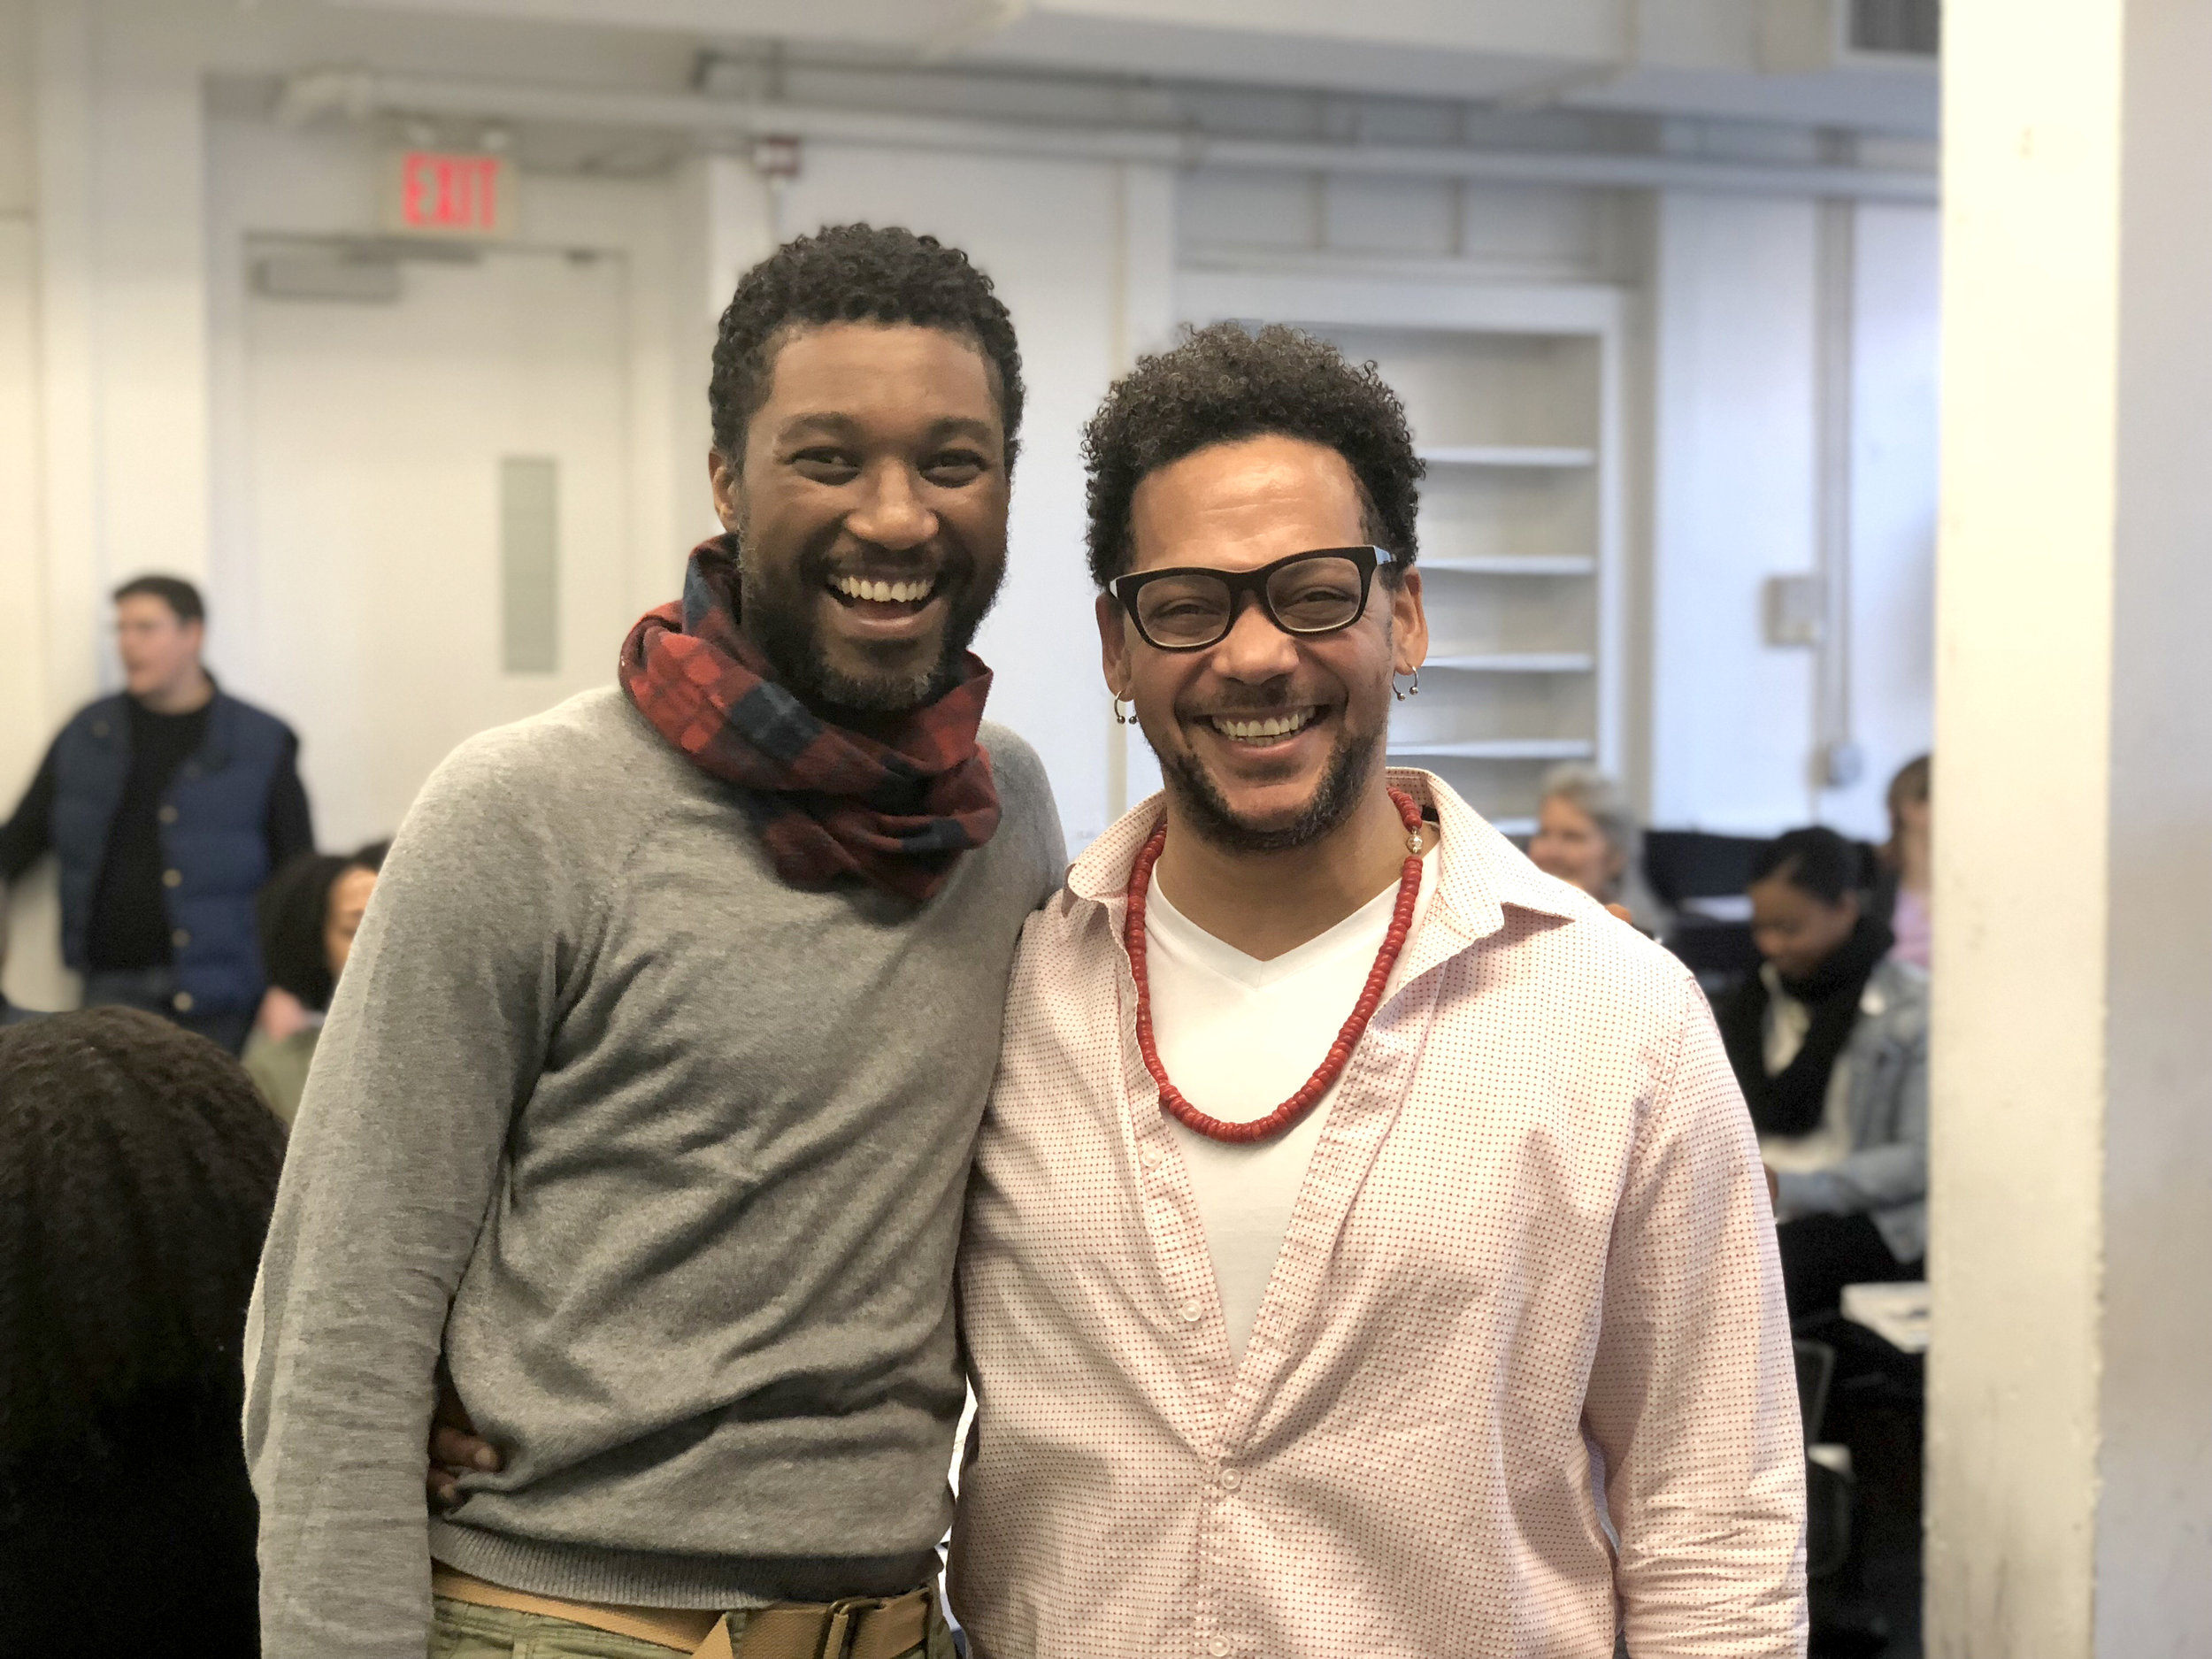 Rehearsal for black odyssey (2019) - Co-Directors Jude Sandy and Joe Wilson, Jr. (Photo: Maxwell Snyder)